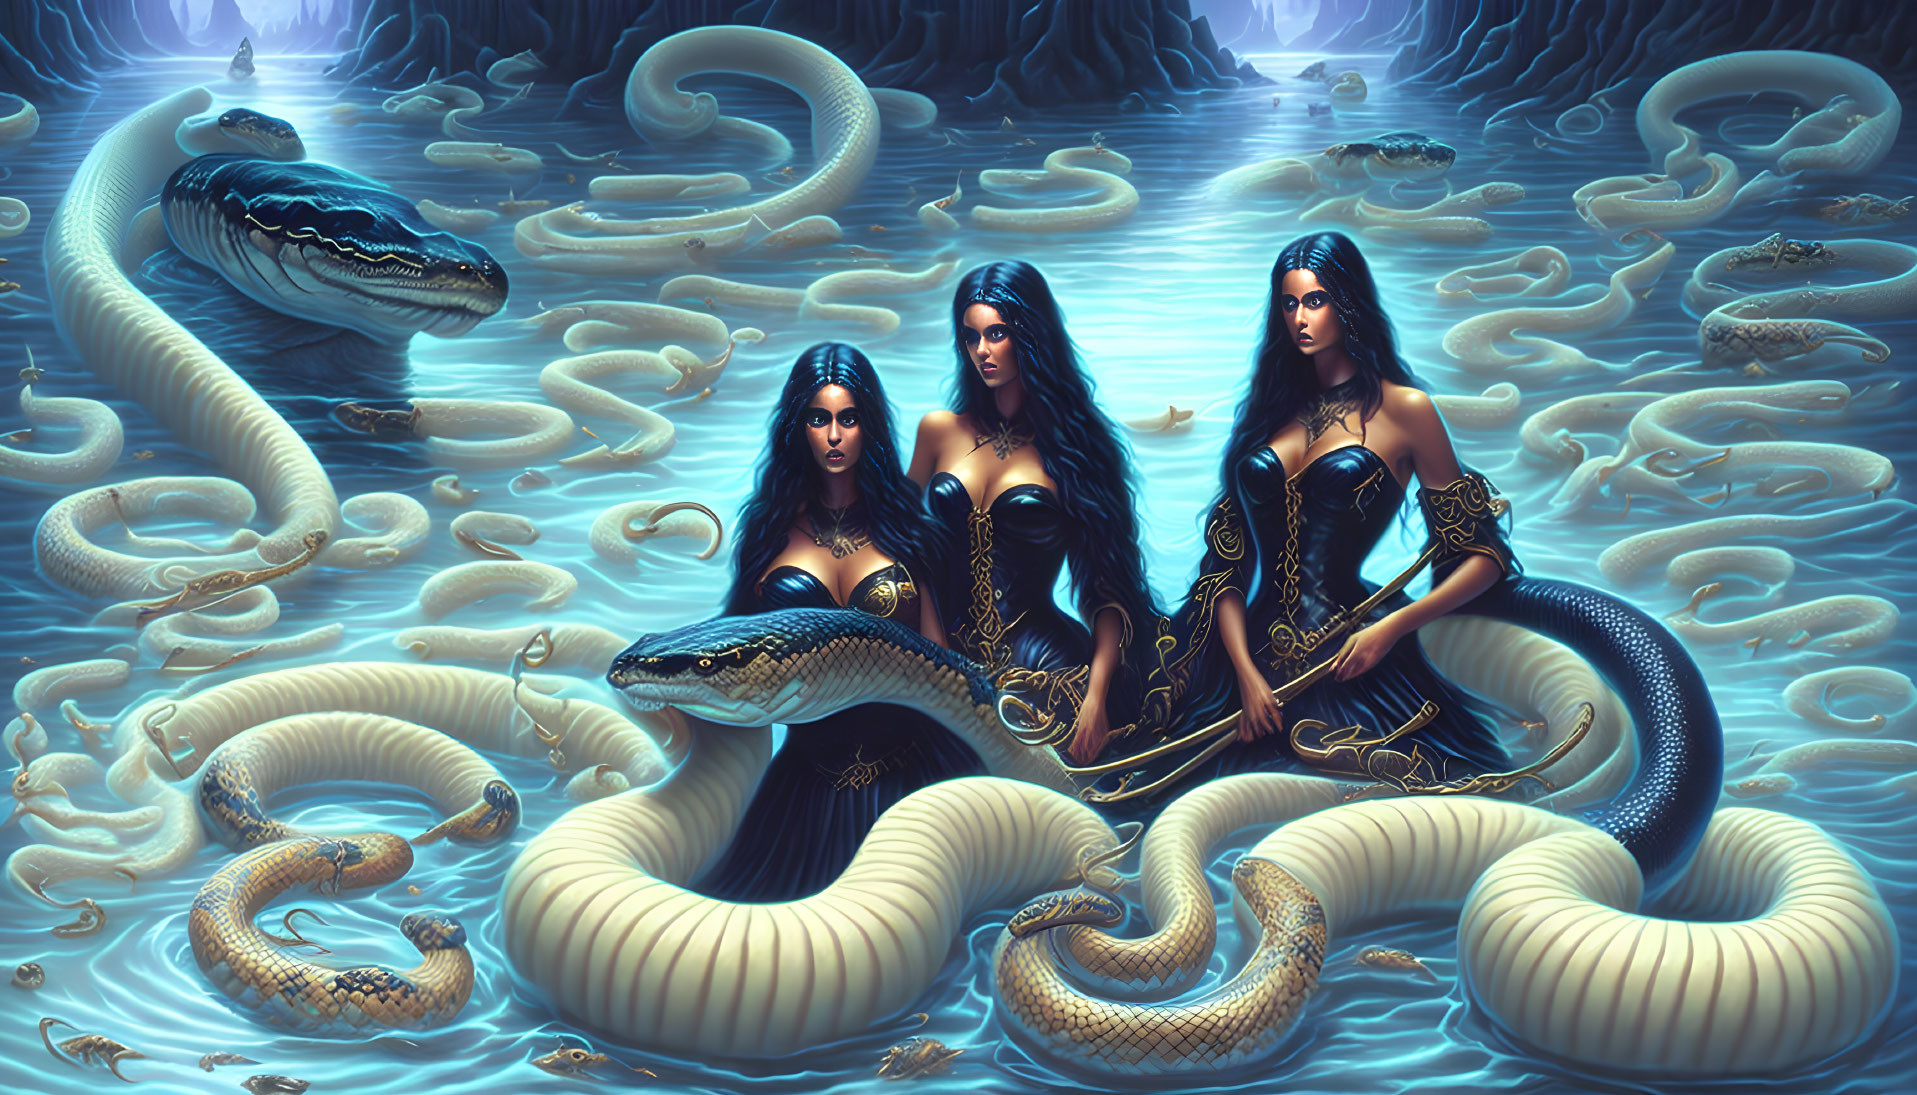 Tough Maidens and Snakeworms